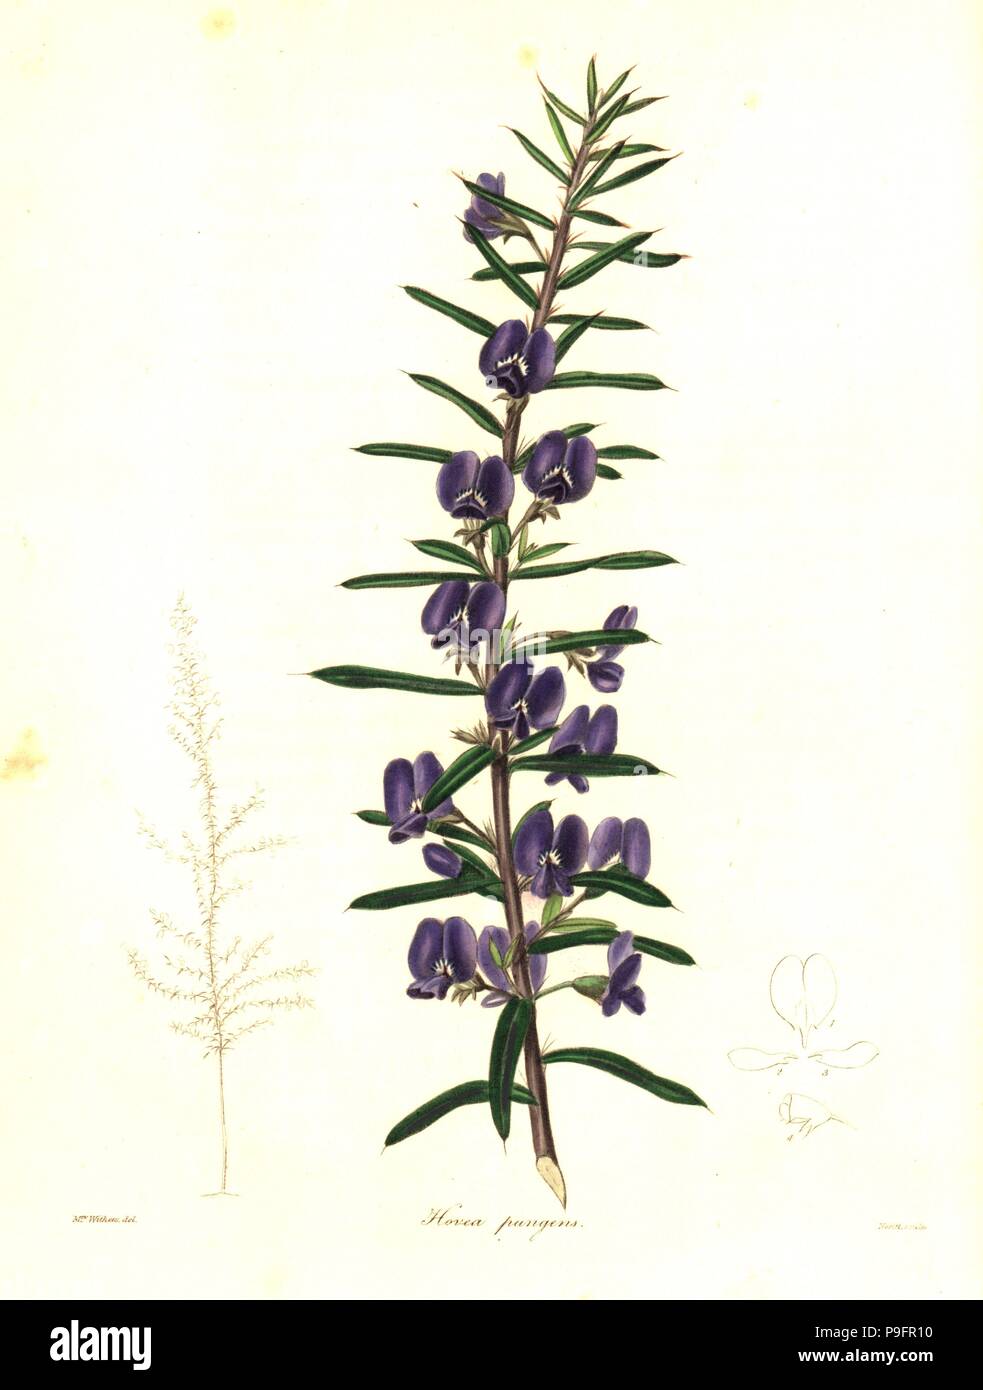 Devil's pins or pungent hovea, Hovea pungens. Handcoloured copperplate engraving by S. Nevitt after a botanical illustration by Mrs Augusta Withers from Benjamin Maund and the Rev. John Stevens Henslow's The Botanist, London, 1836. Stock Photo